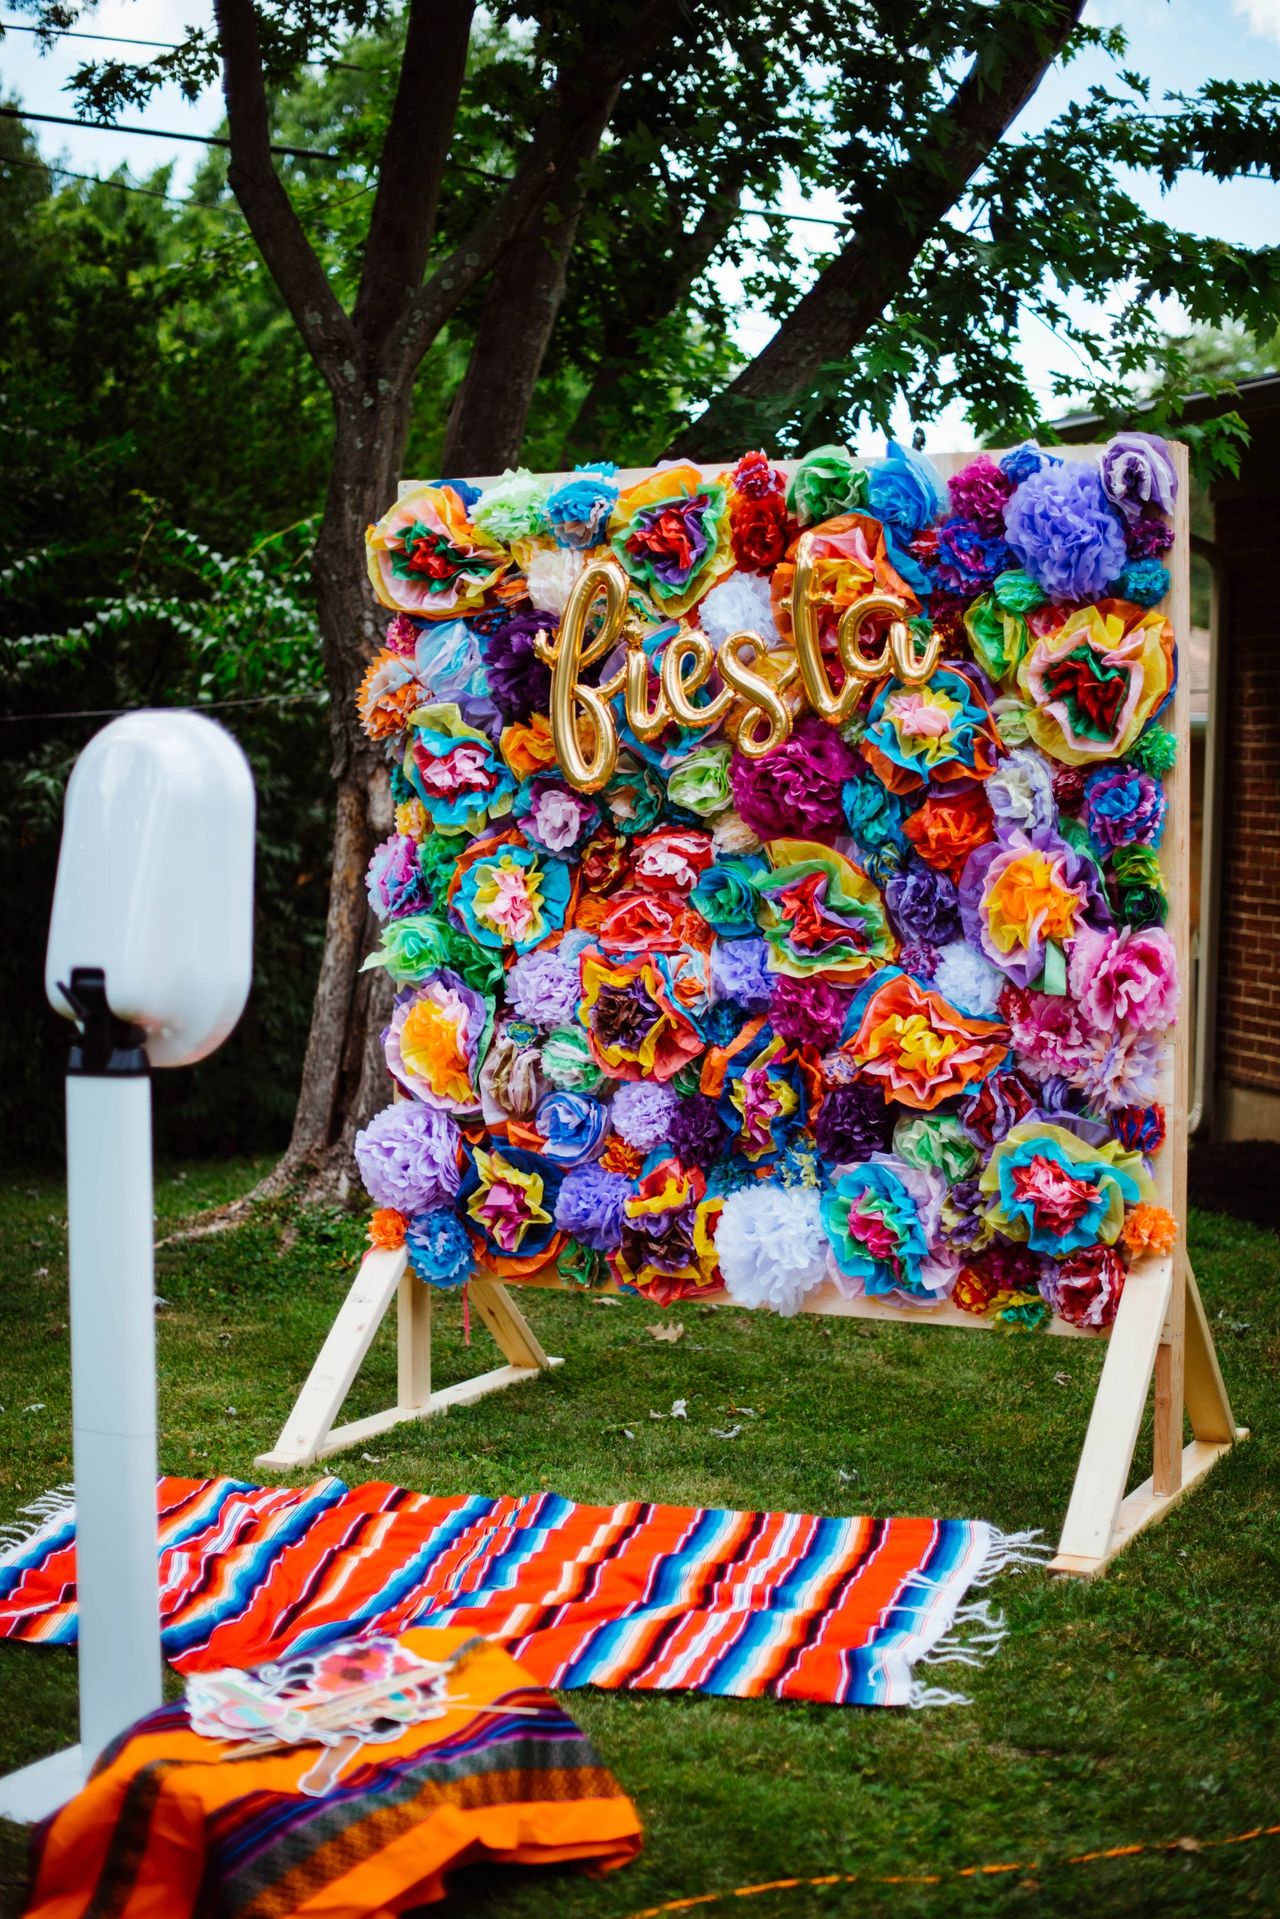 Photo Booth made of tissue paper flowers and fiesta balloon sign